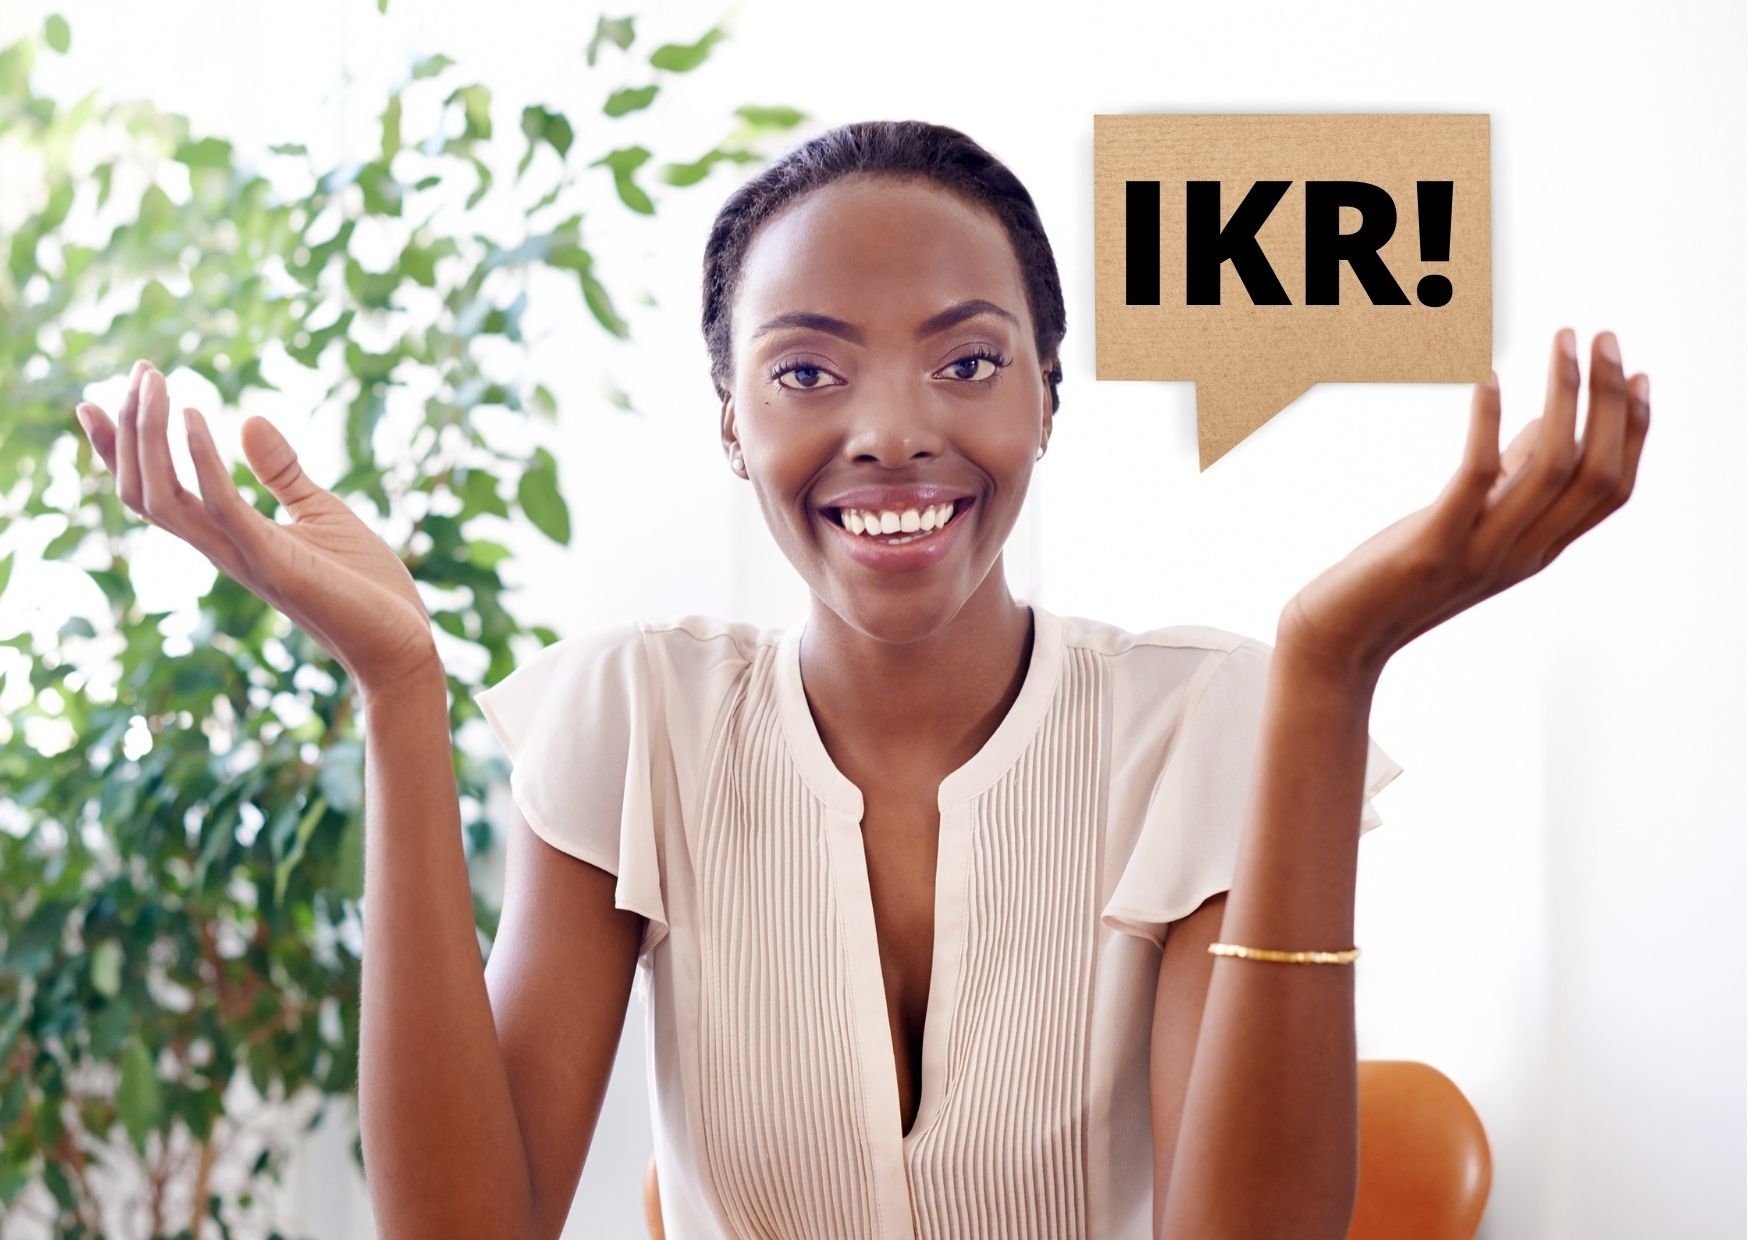 I woman gesturing "I KNOW, RIGHT?" with the speech bubble: "IKR"